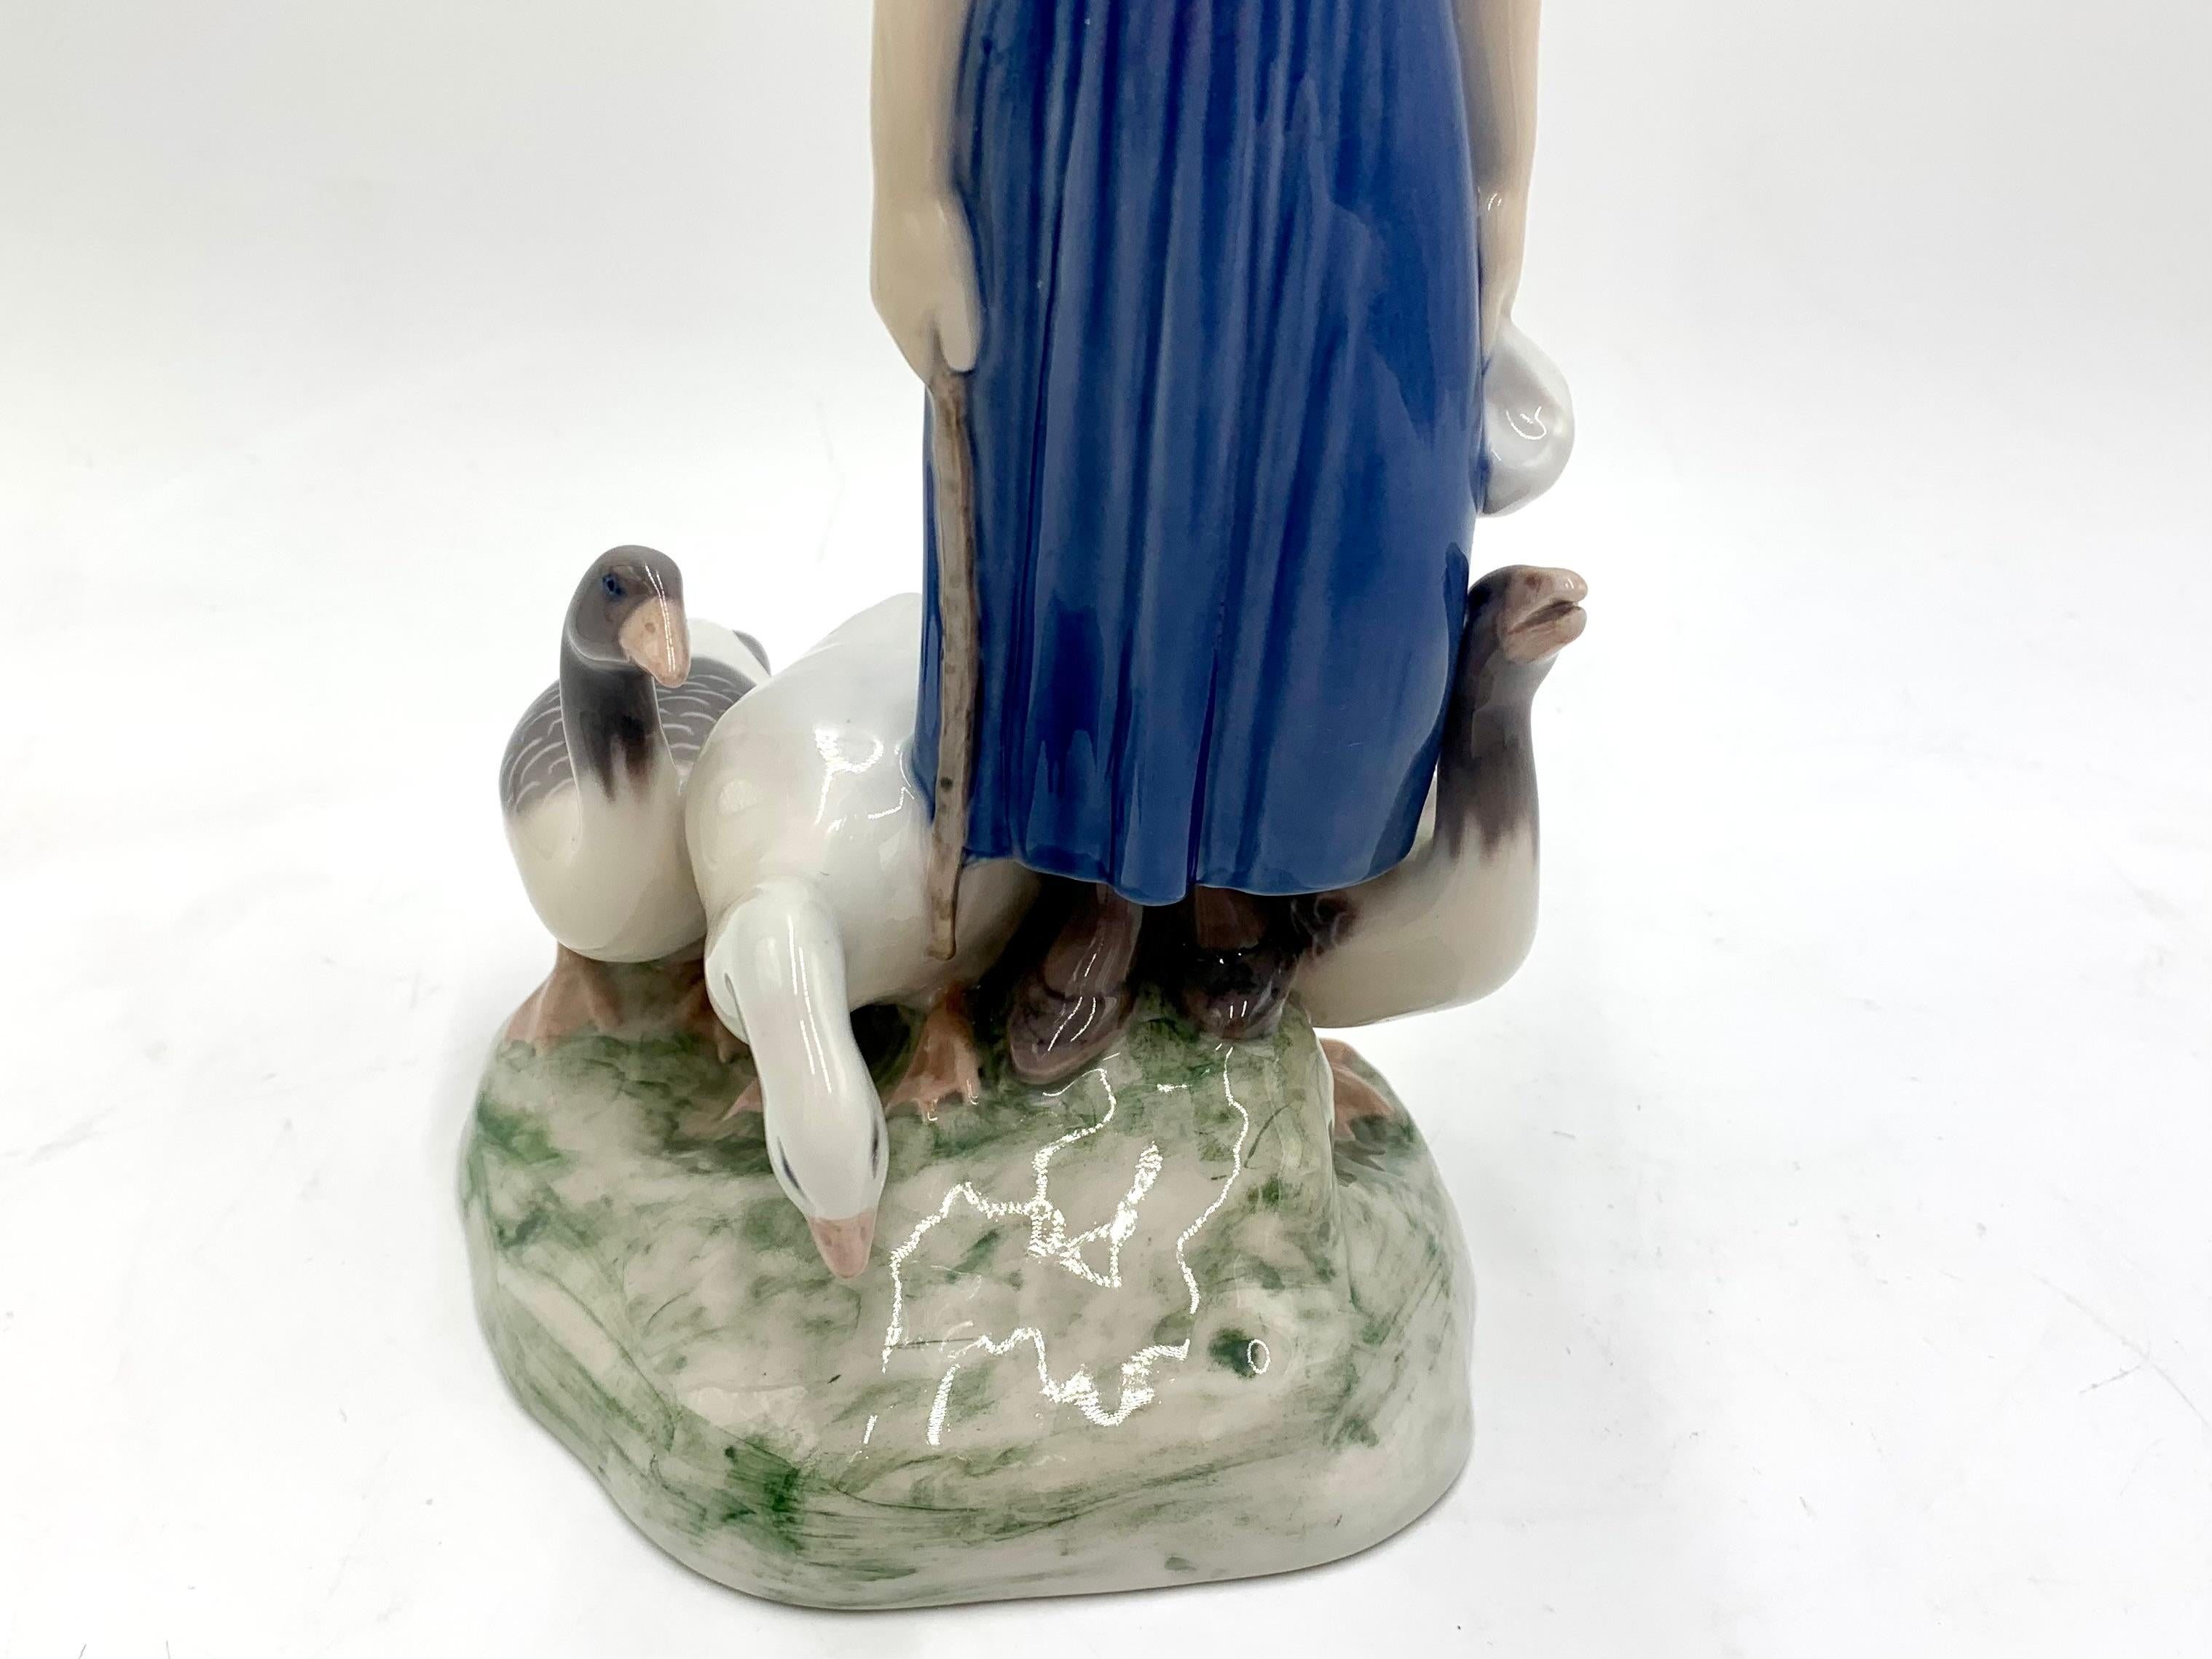 20th Century Porcelain Figurine of a Woman with Geese, Bing & Grondahl, Denmark, 1950s / 1960